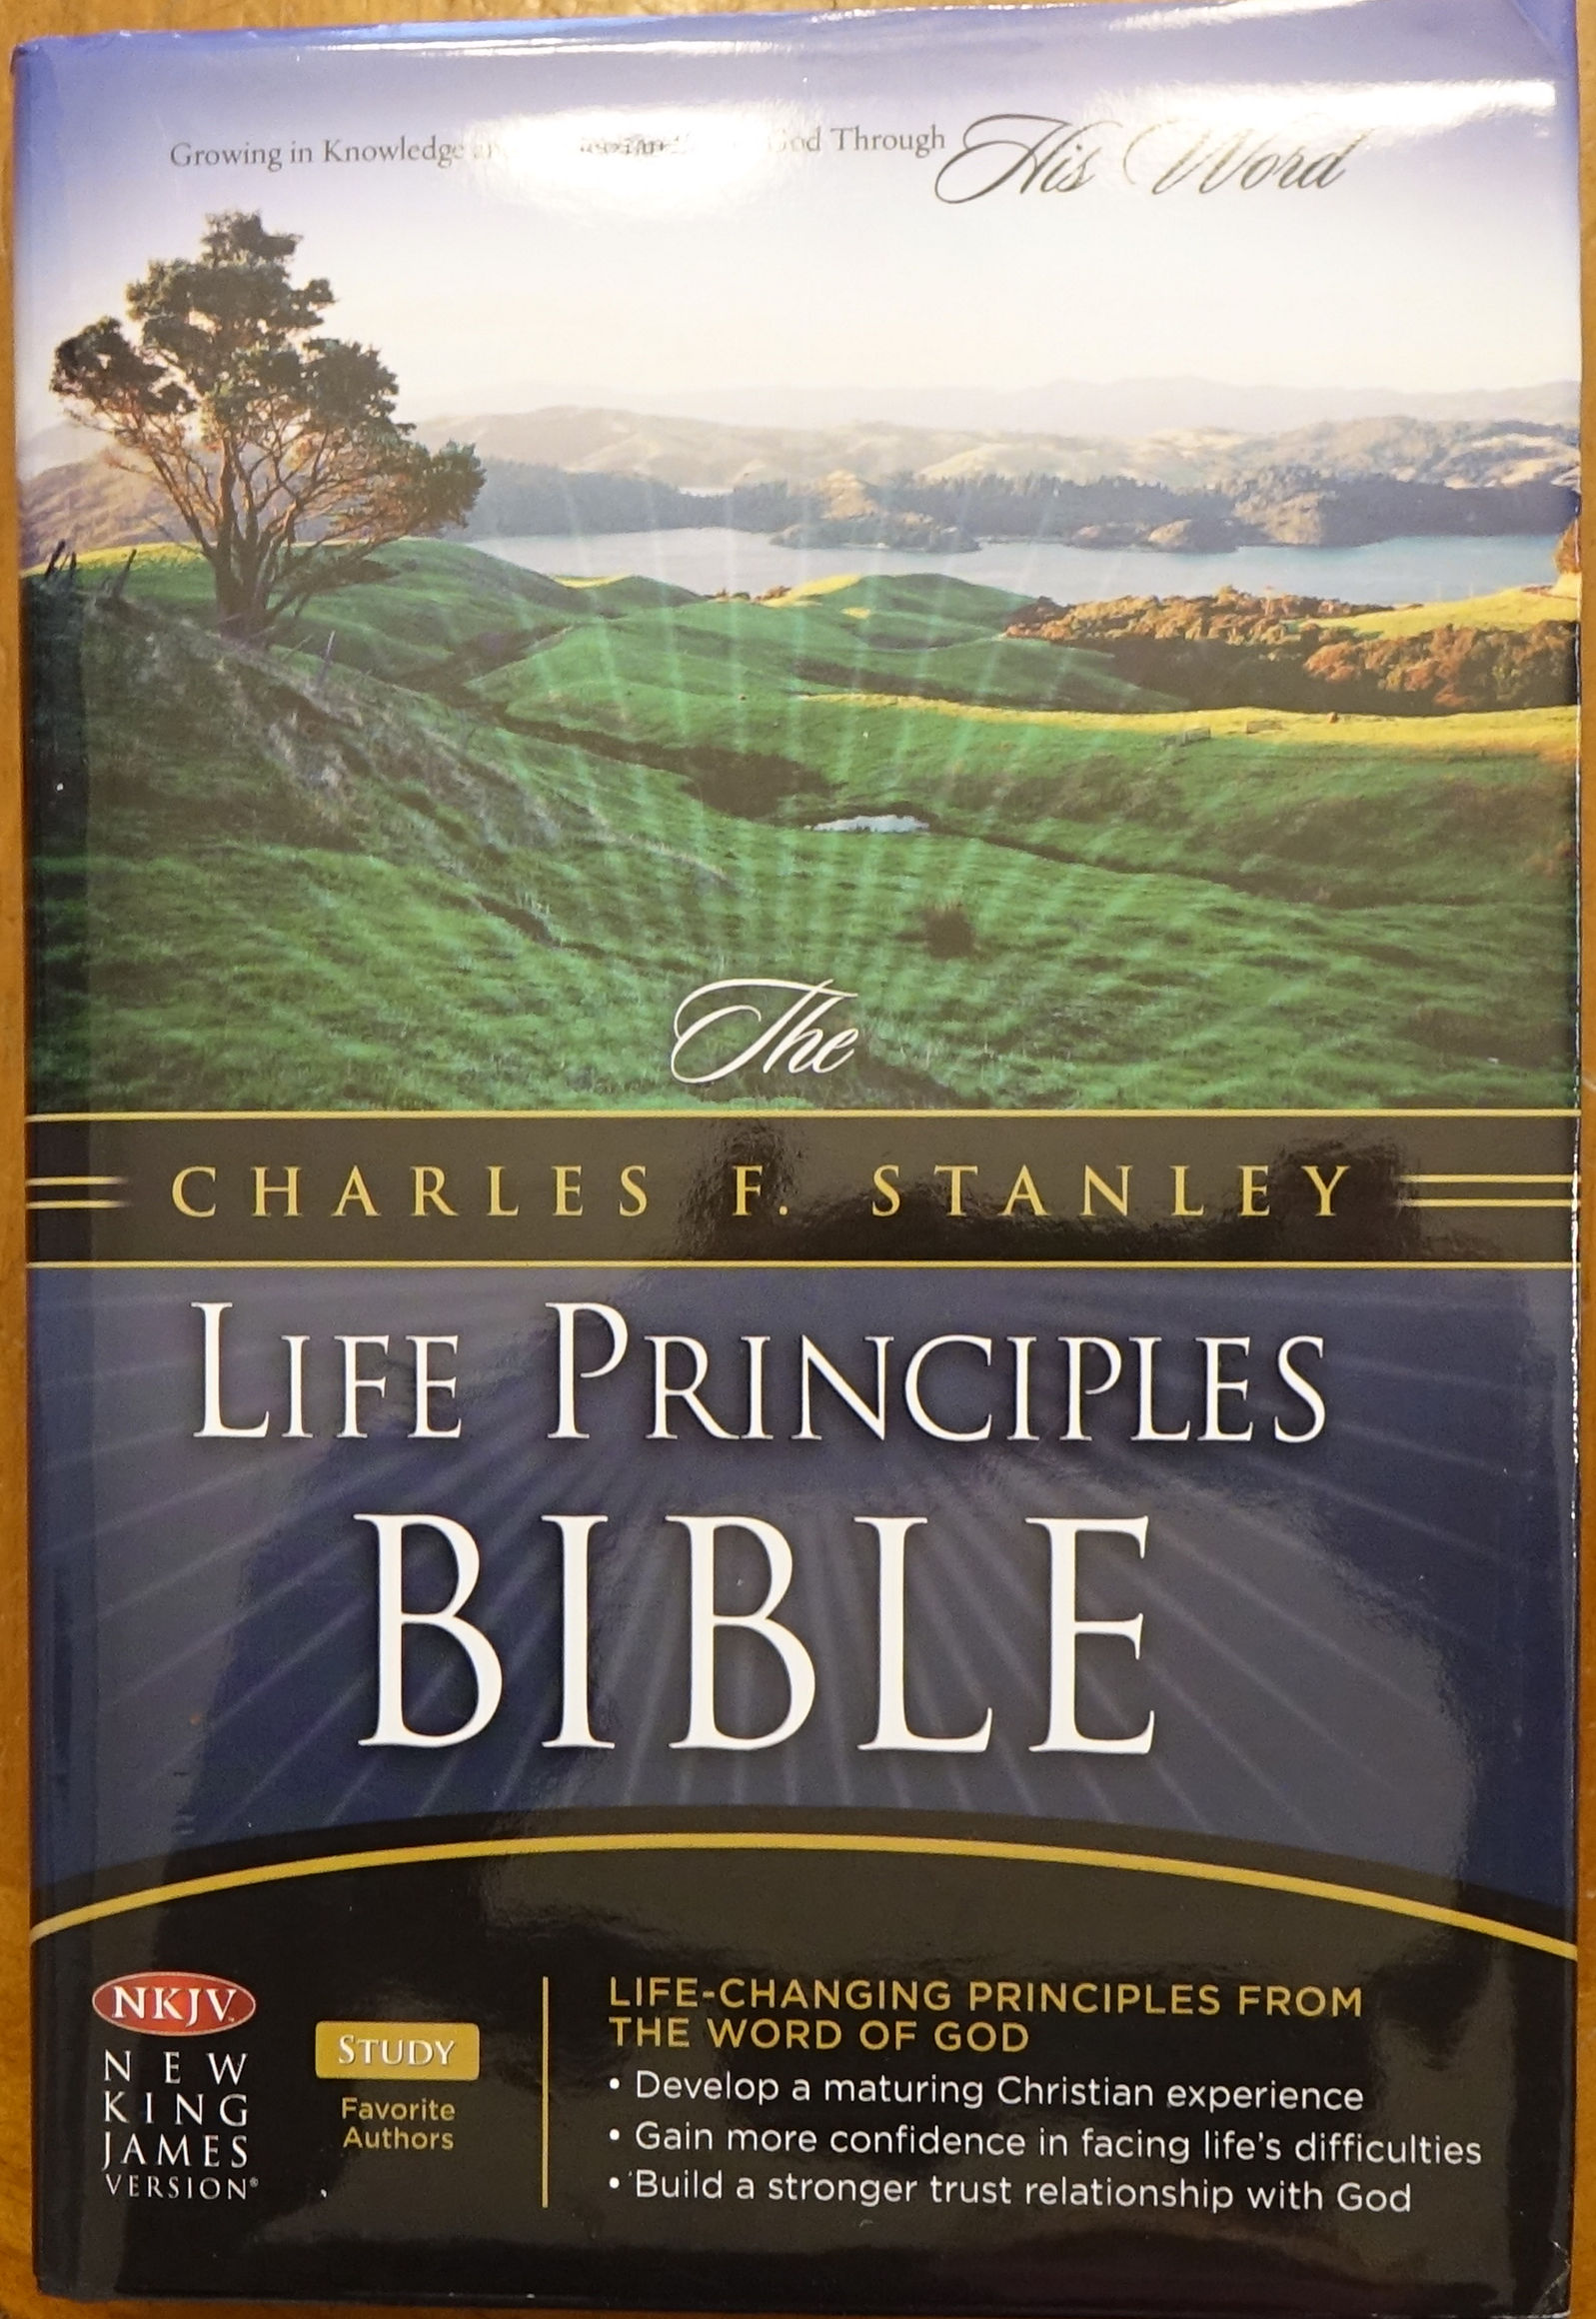 The Charles F. Stanley Life Principles Bible - New King James Version - n/a